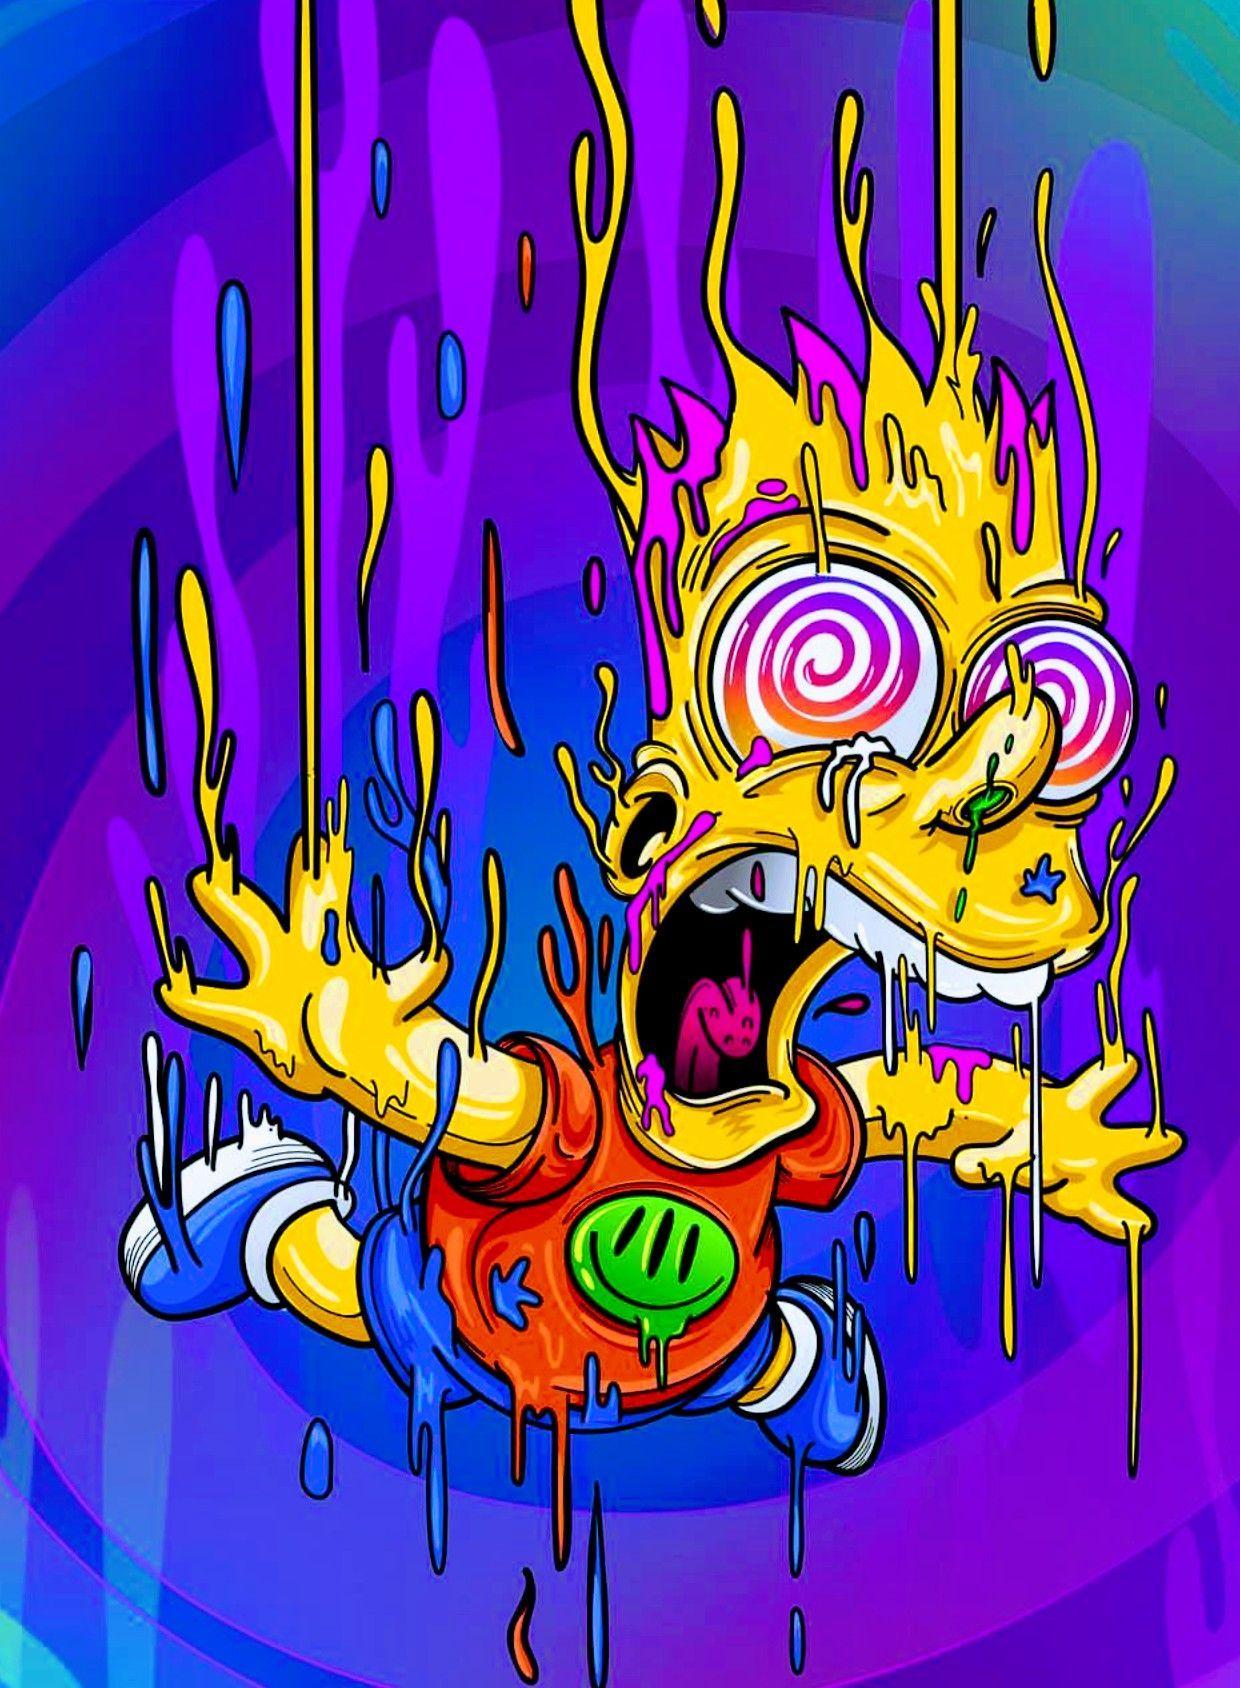 A melting yellow creature with a rainbow eye and pink lips, screaming and melting on a purple background. - Bart Simpson